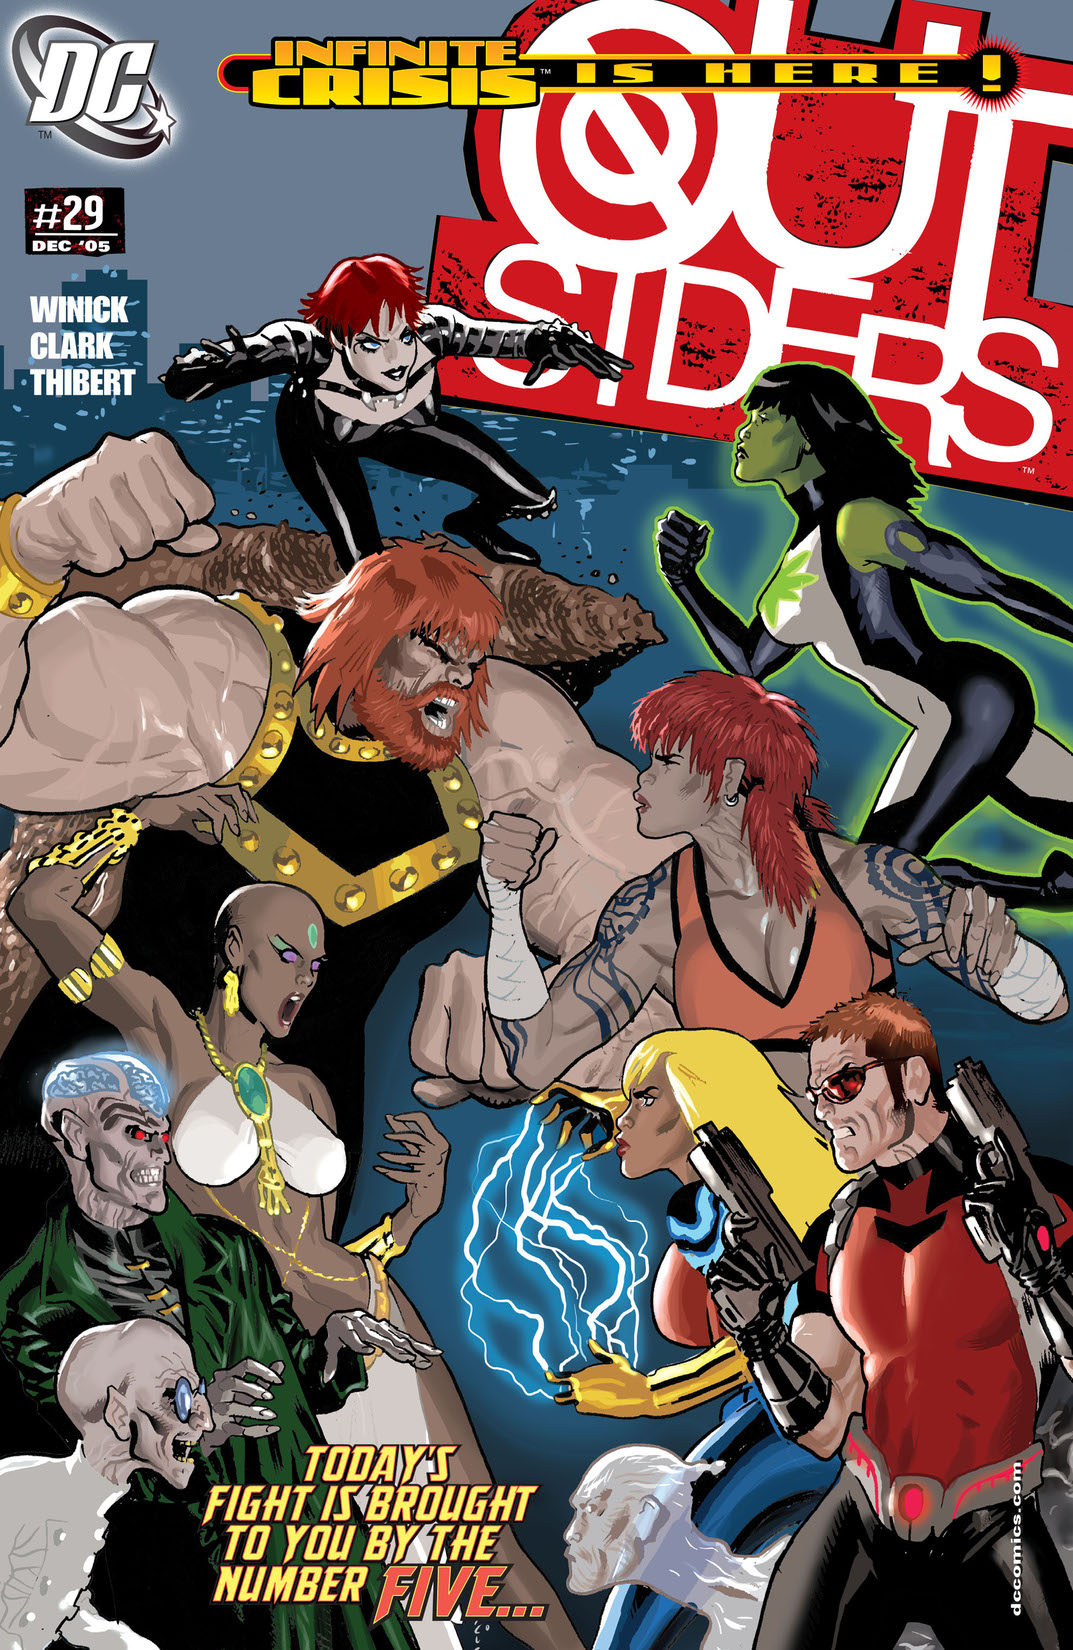 Outsiders (2003-) #29 preview images